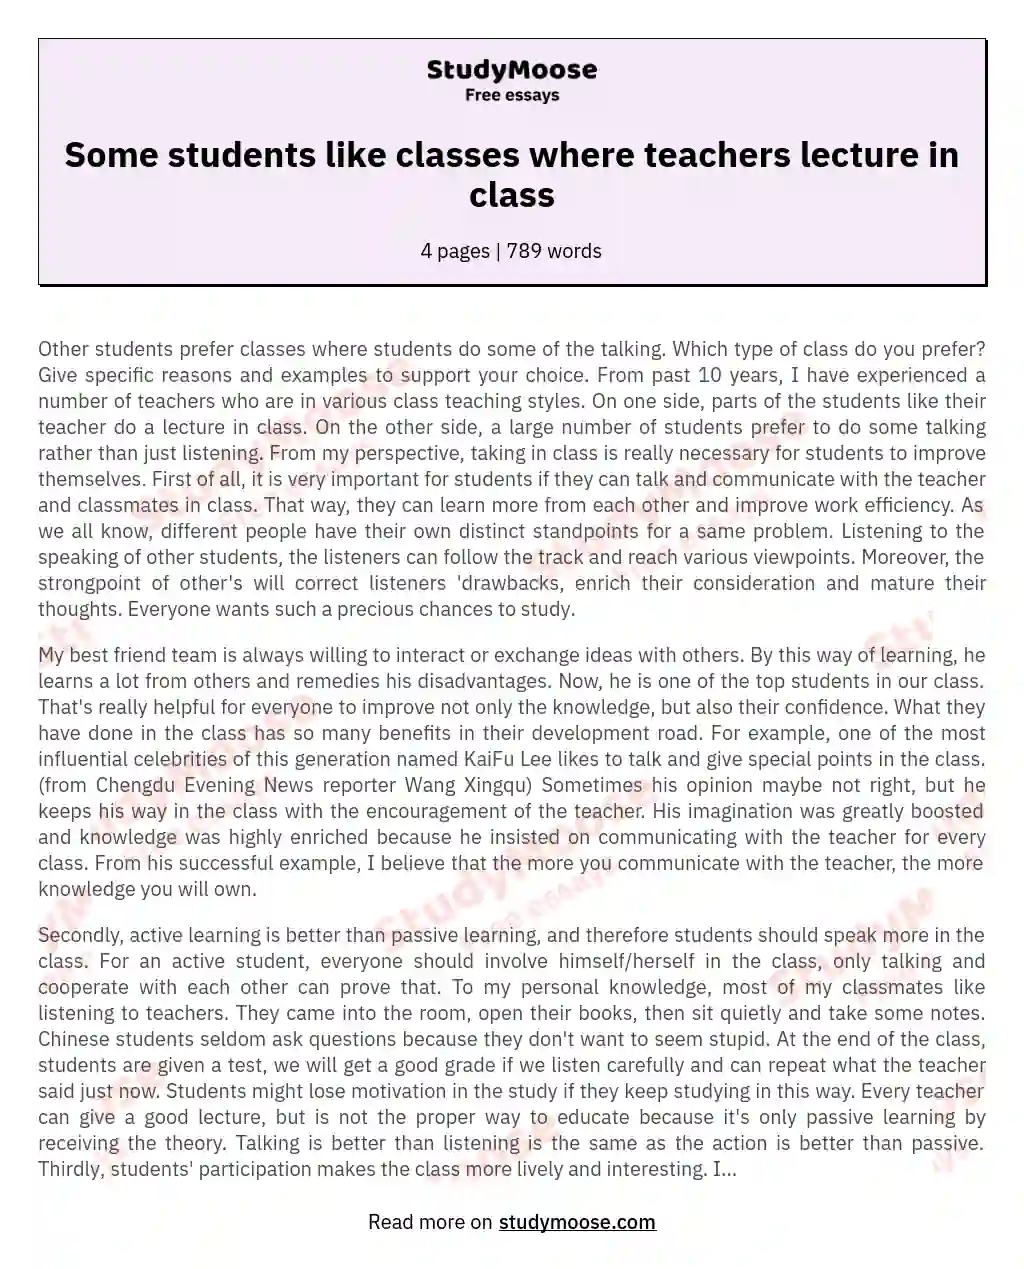 Some students like classes where teachers lecture in class